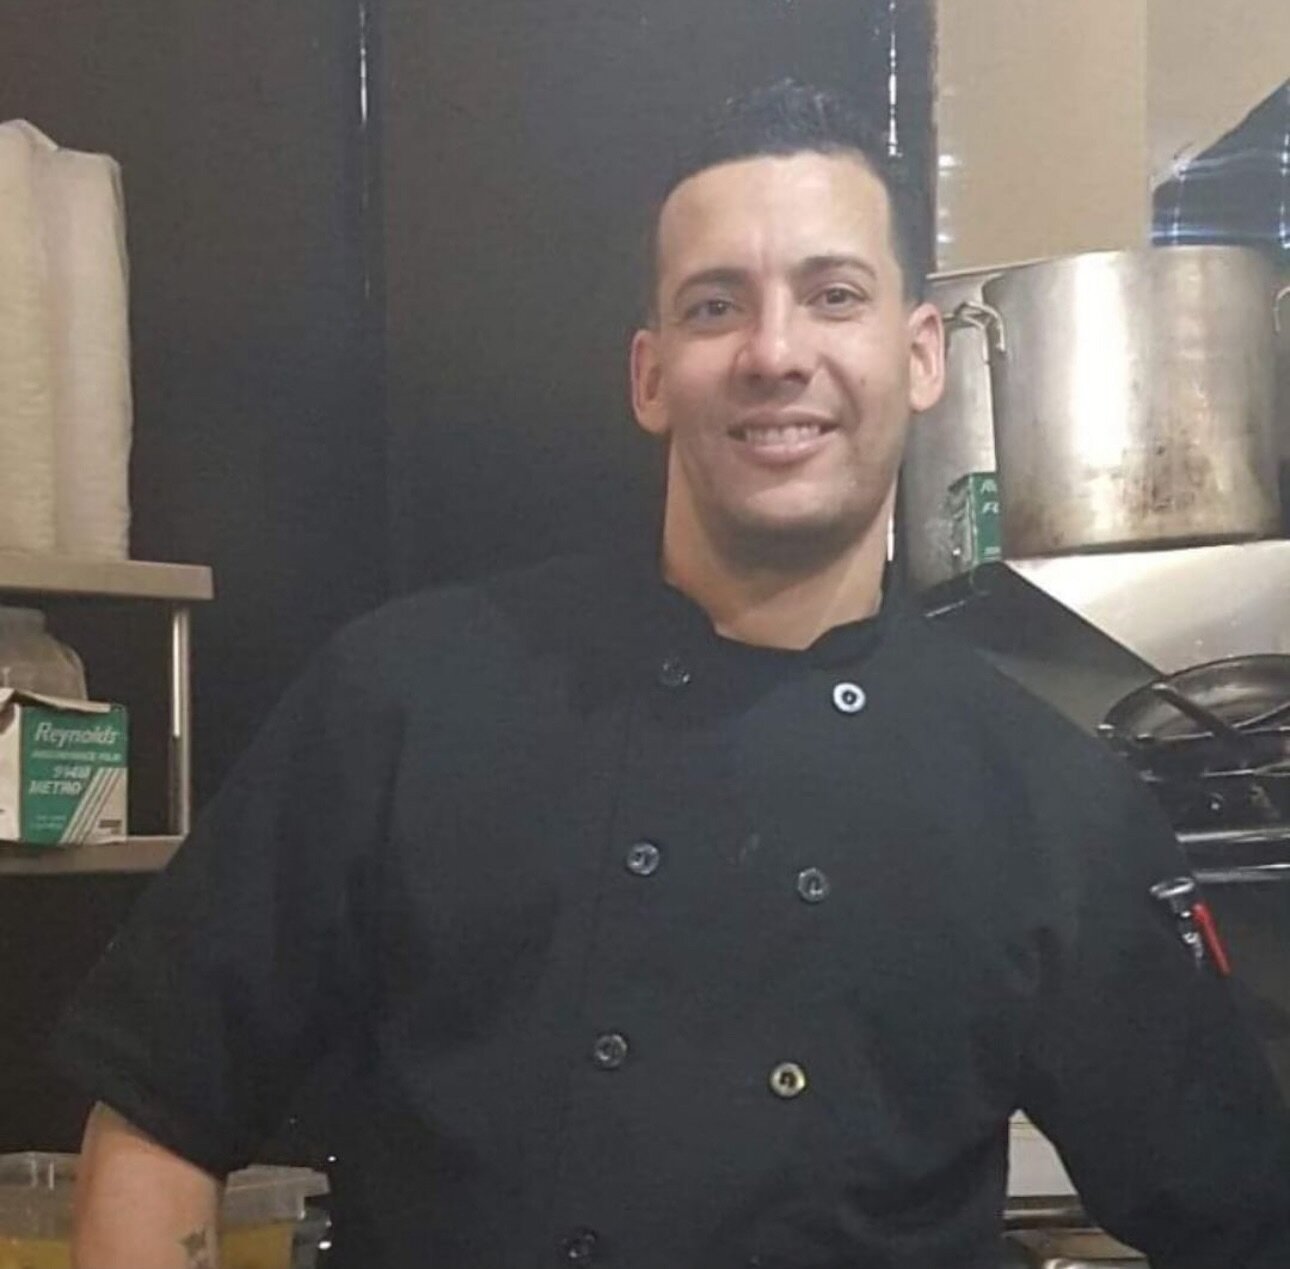 Let&rsquo;s give a warm welcome to our new head chef @chef_gabiel who is Born and Raised in Puerto Rico. Chef Gaby has worked at some of the most iconic Puerto Rican Restaurants in NYC as well as in Puerto Rico.  A definite great addition to our Kios